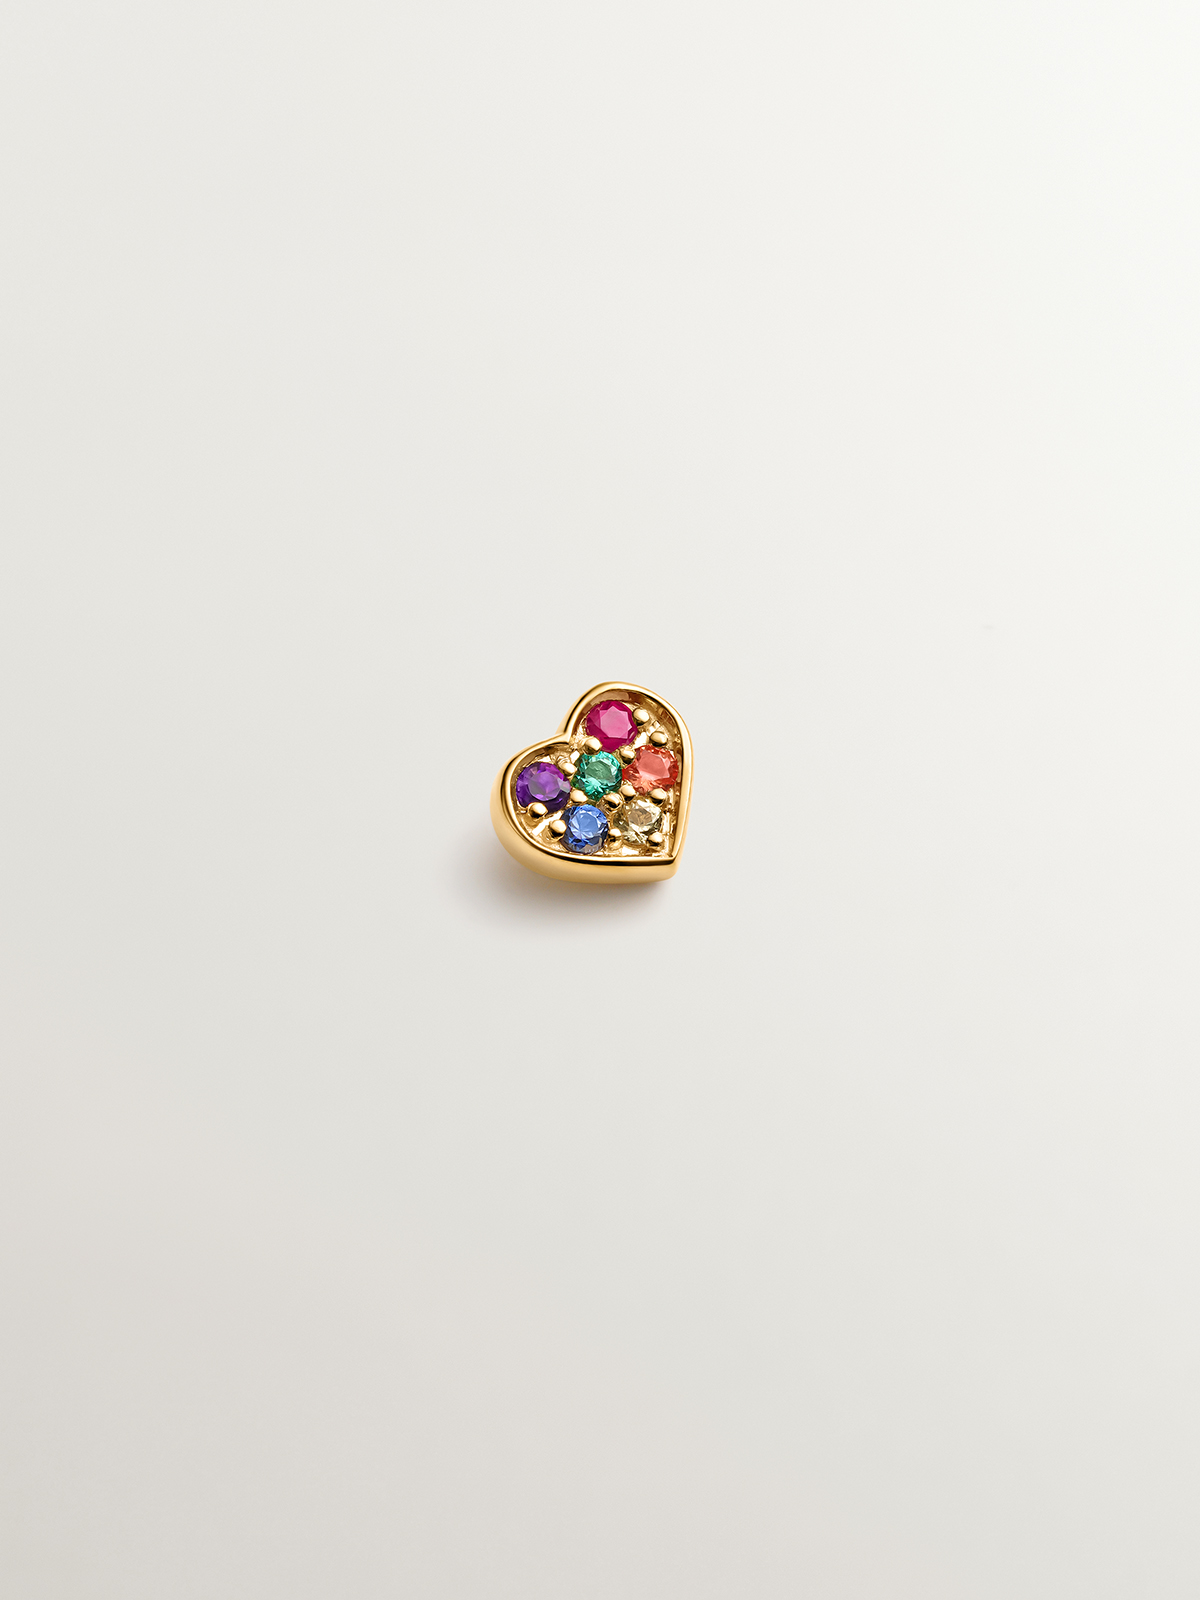 18K yellow gold piercing with emerald, ruby, and multicolor sapphires shaped like a heart.